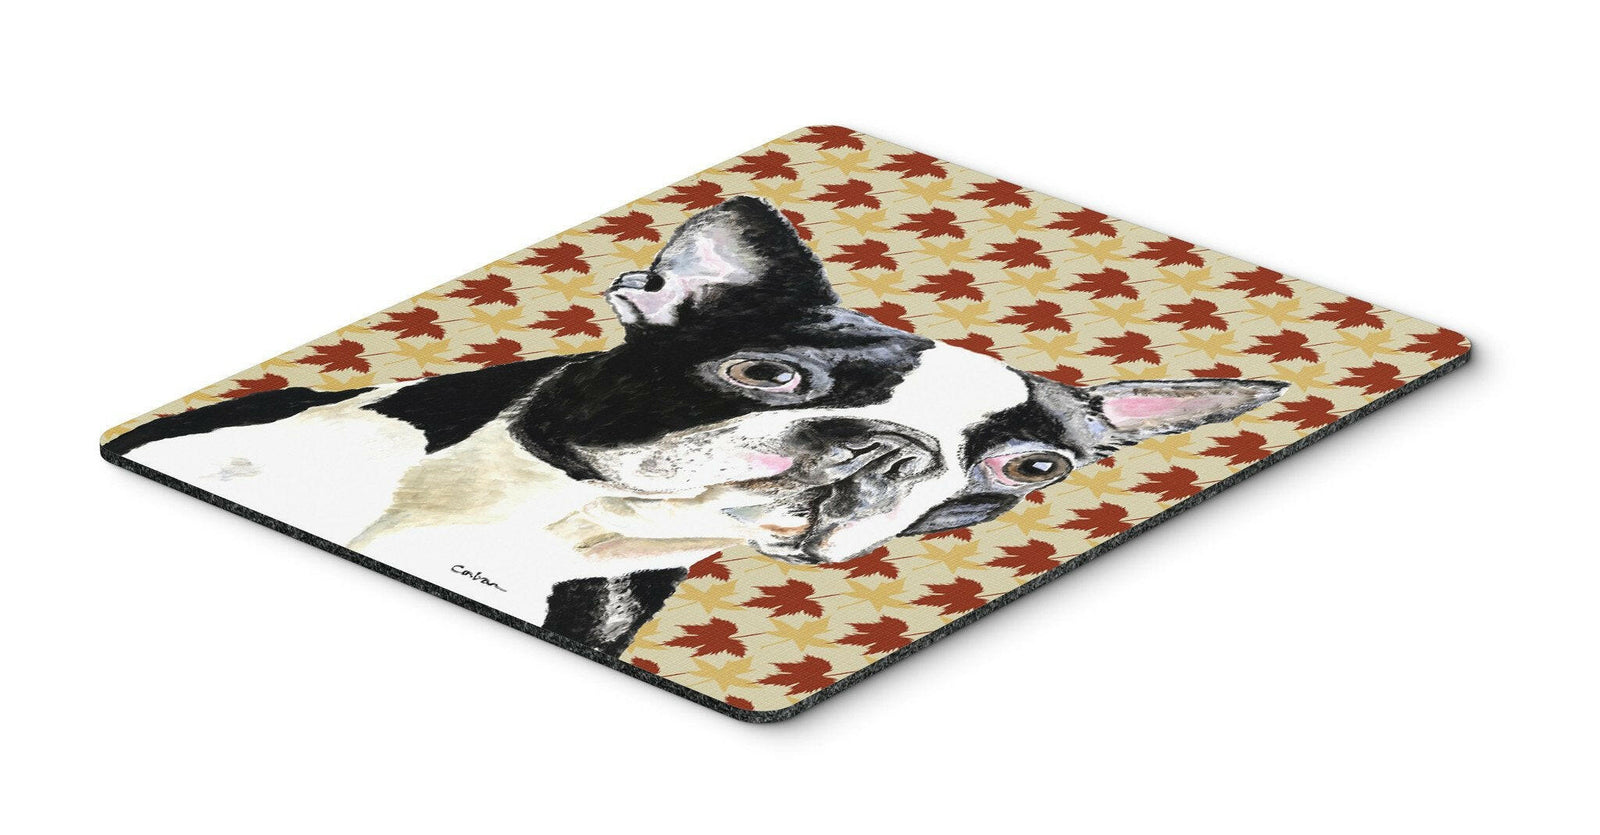 Boston Terrier Fall Leaves Portrait Mouse Pad, Hot Pad or Trivet by Caroline's Treasures